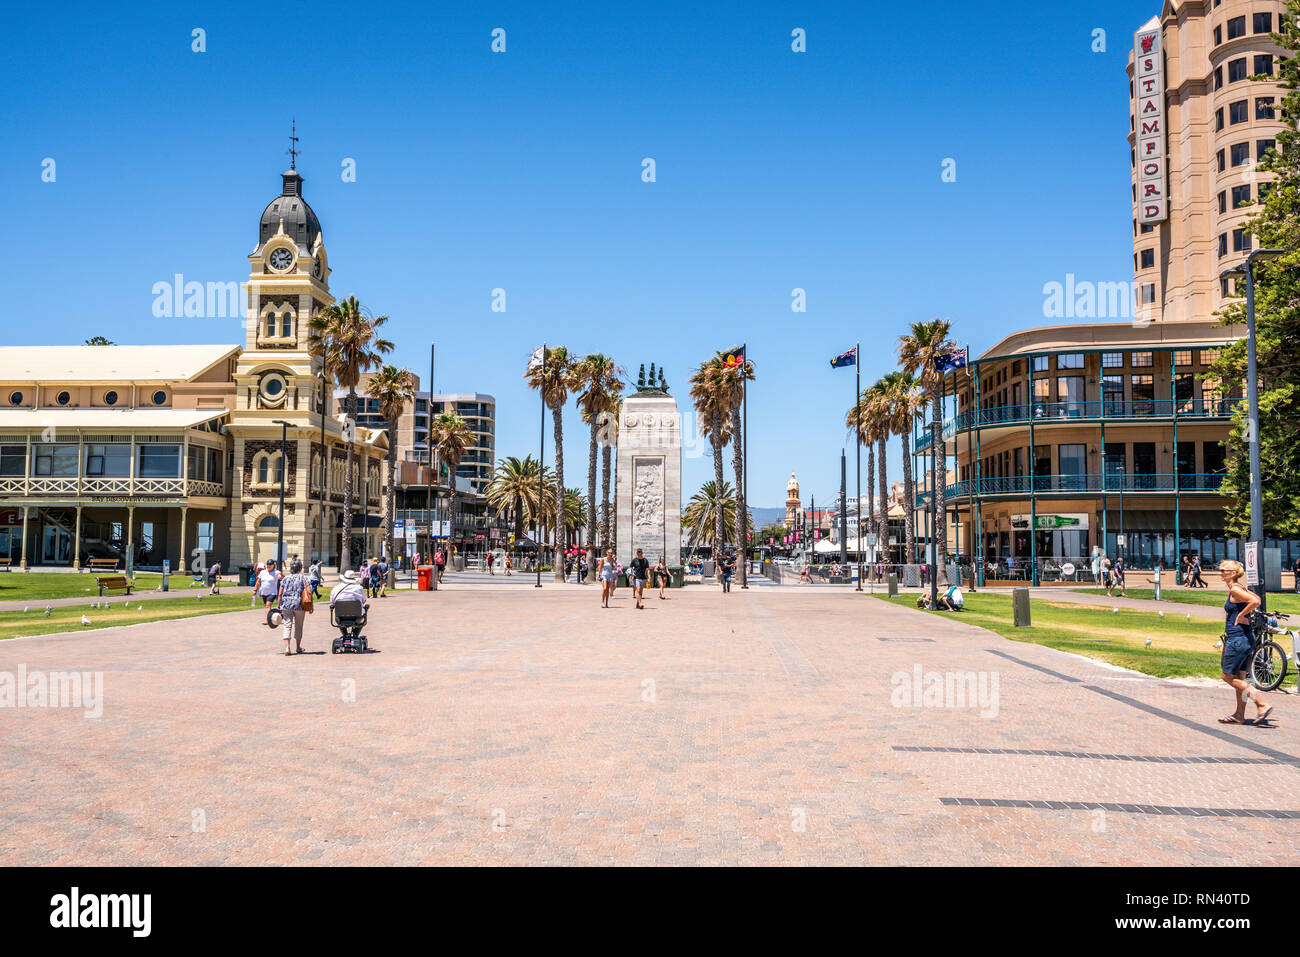 31st December 2018 , Glenelg Adelaide South Australia : Glenelg Moseley square view from the jetty with the Pioneer Memorial monument in the middle in Stock Photo